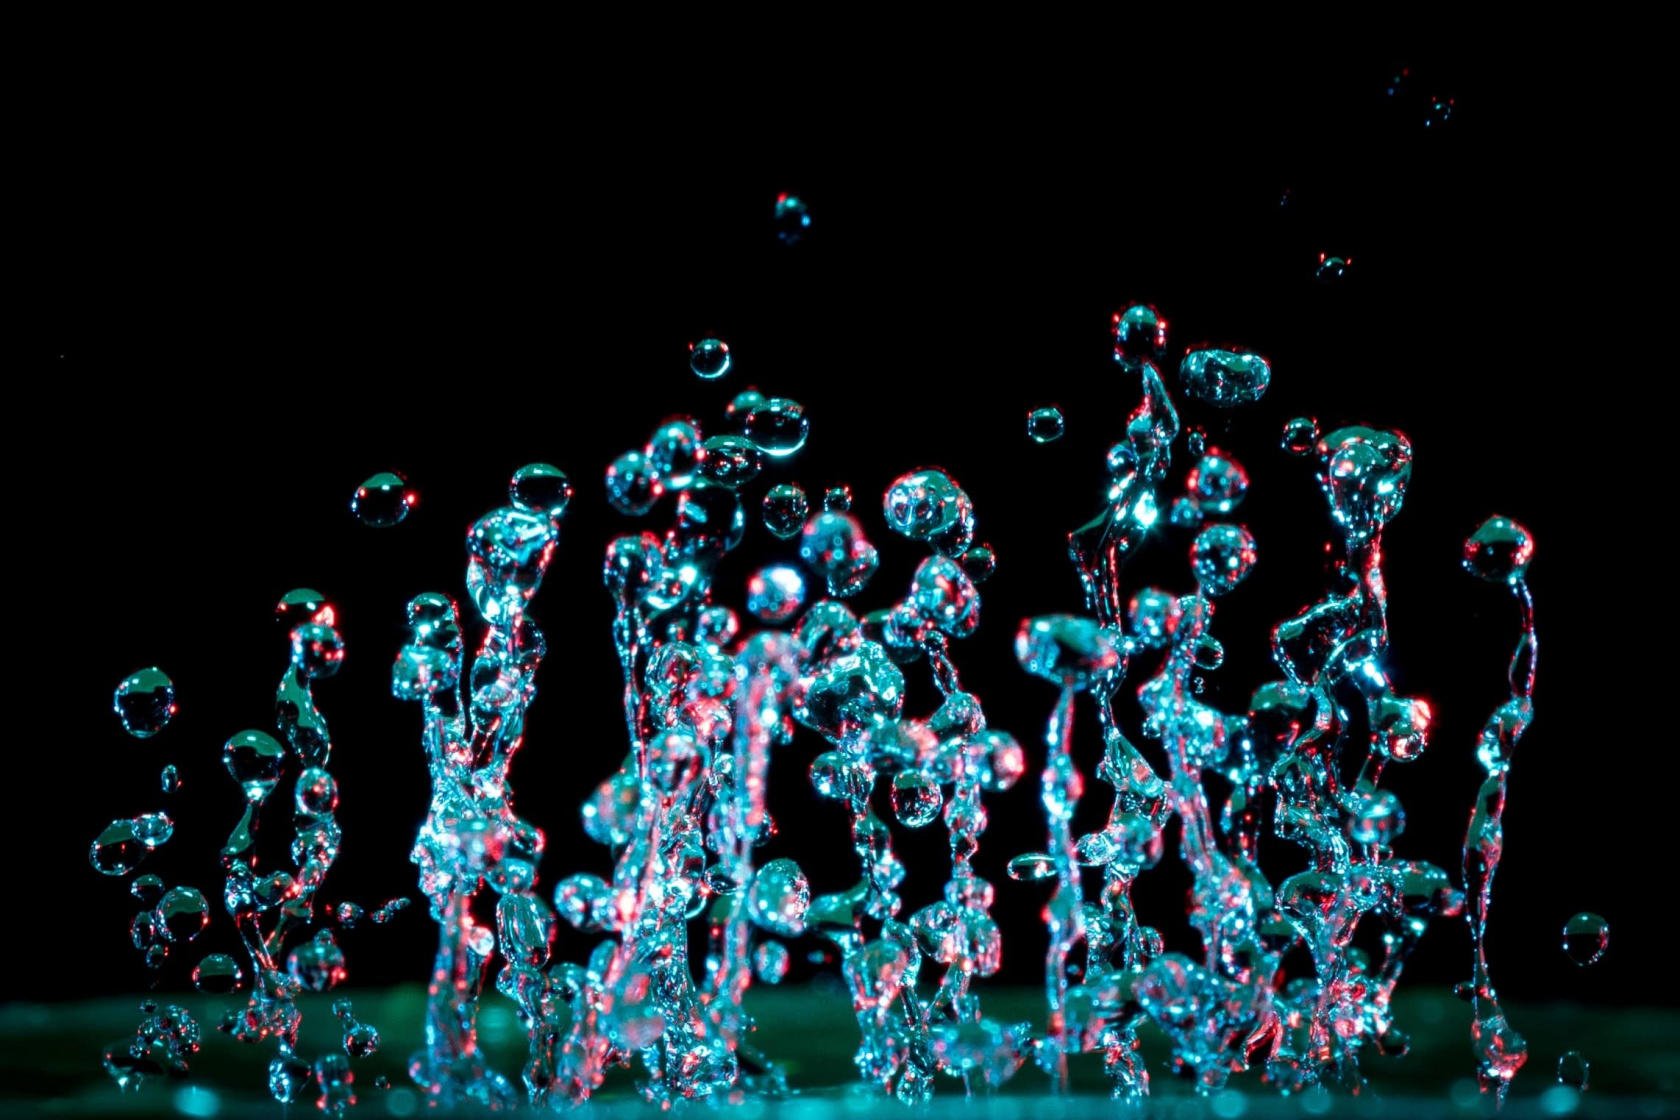 5 Tips for Water Droplet Photography Image1